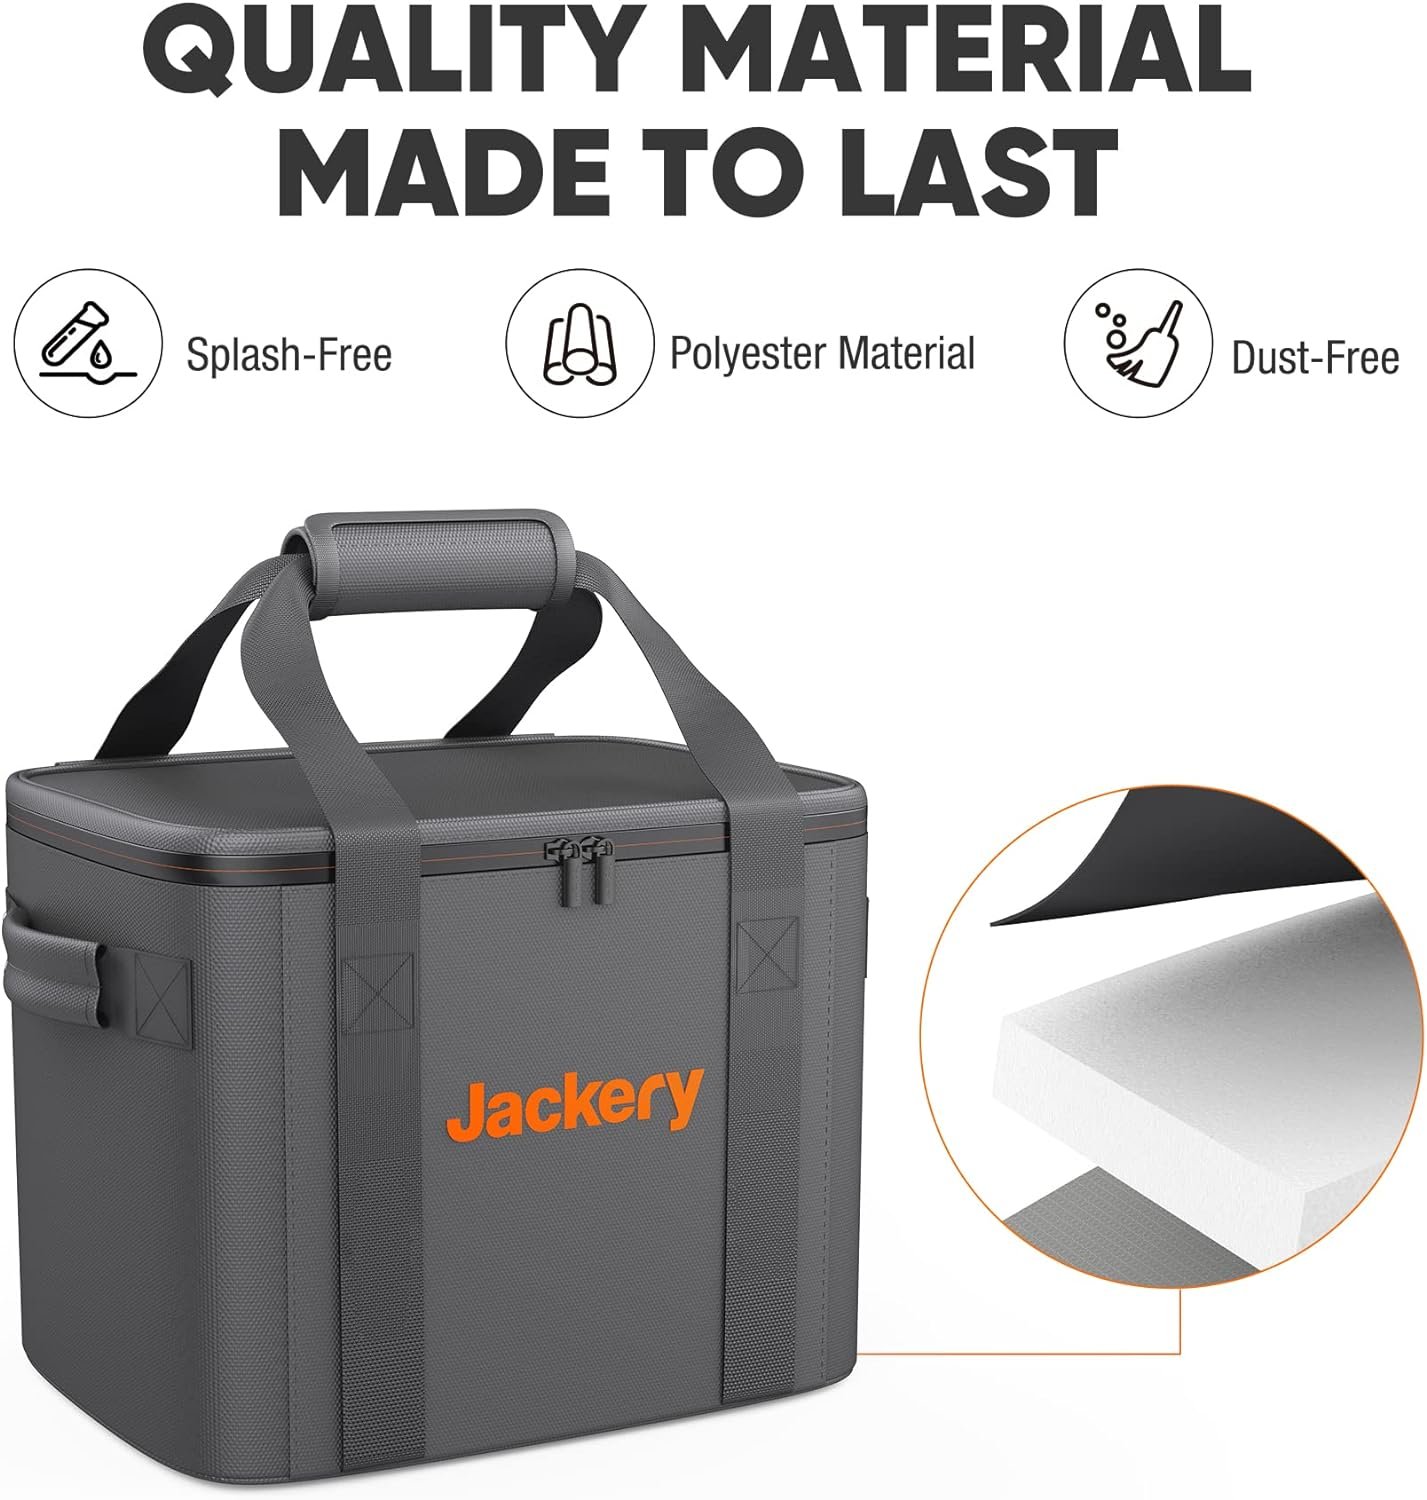 Jackery Carrying Case Bag (S Size) for Explorer 240/300/500 Portable Power Station Review